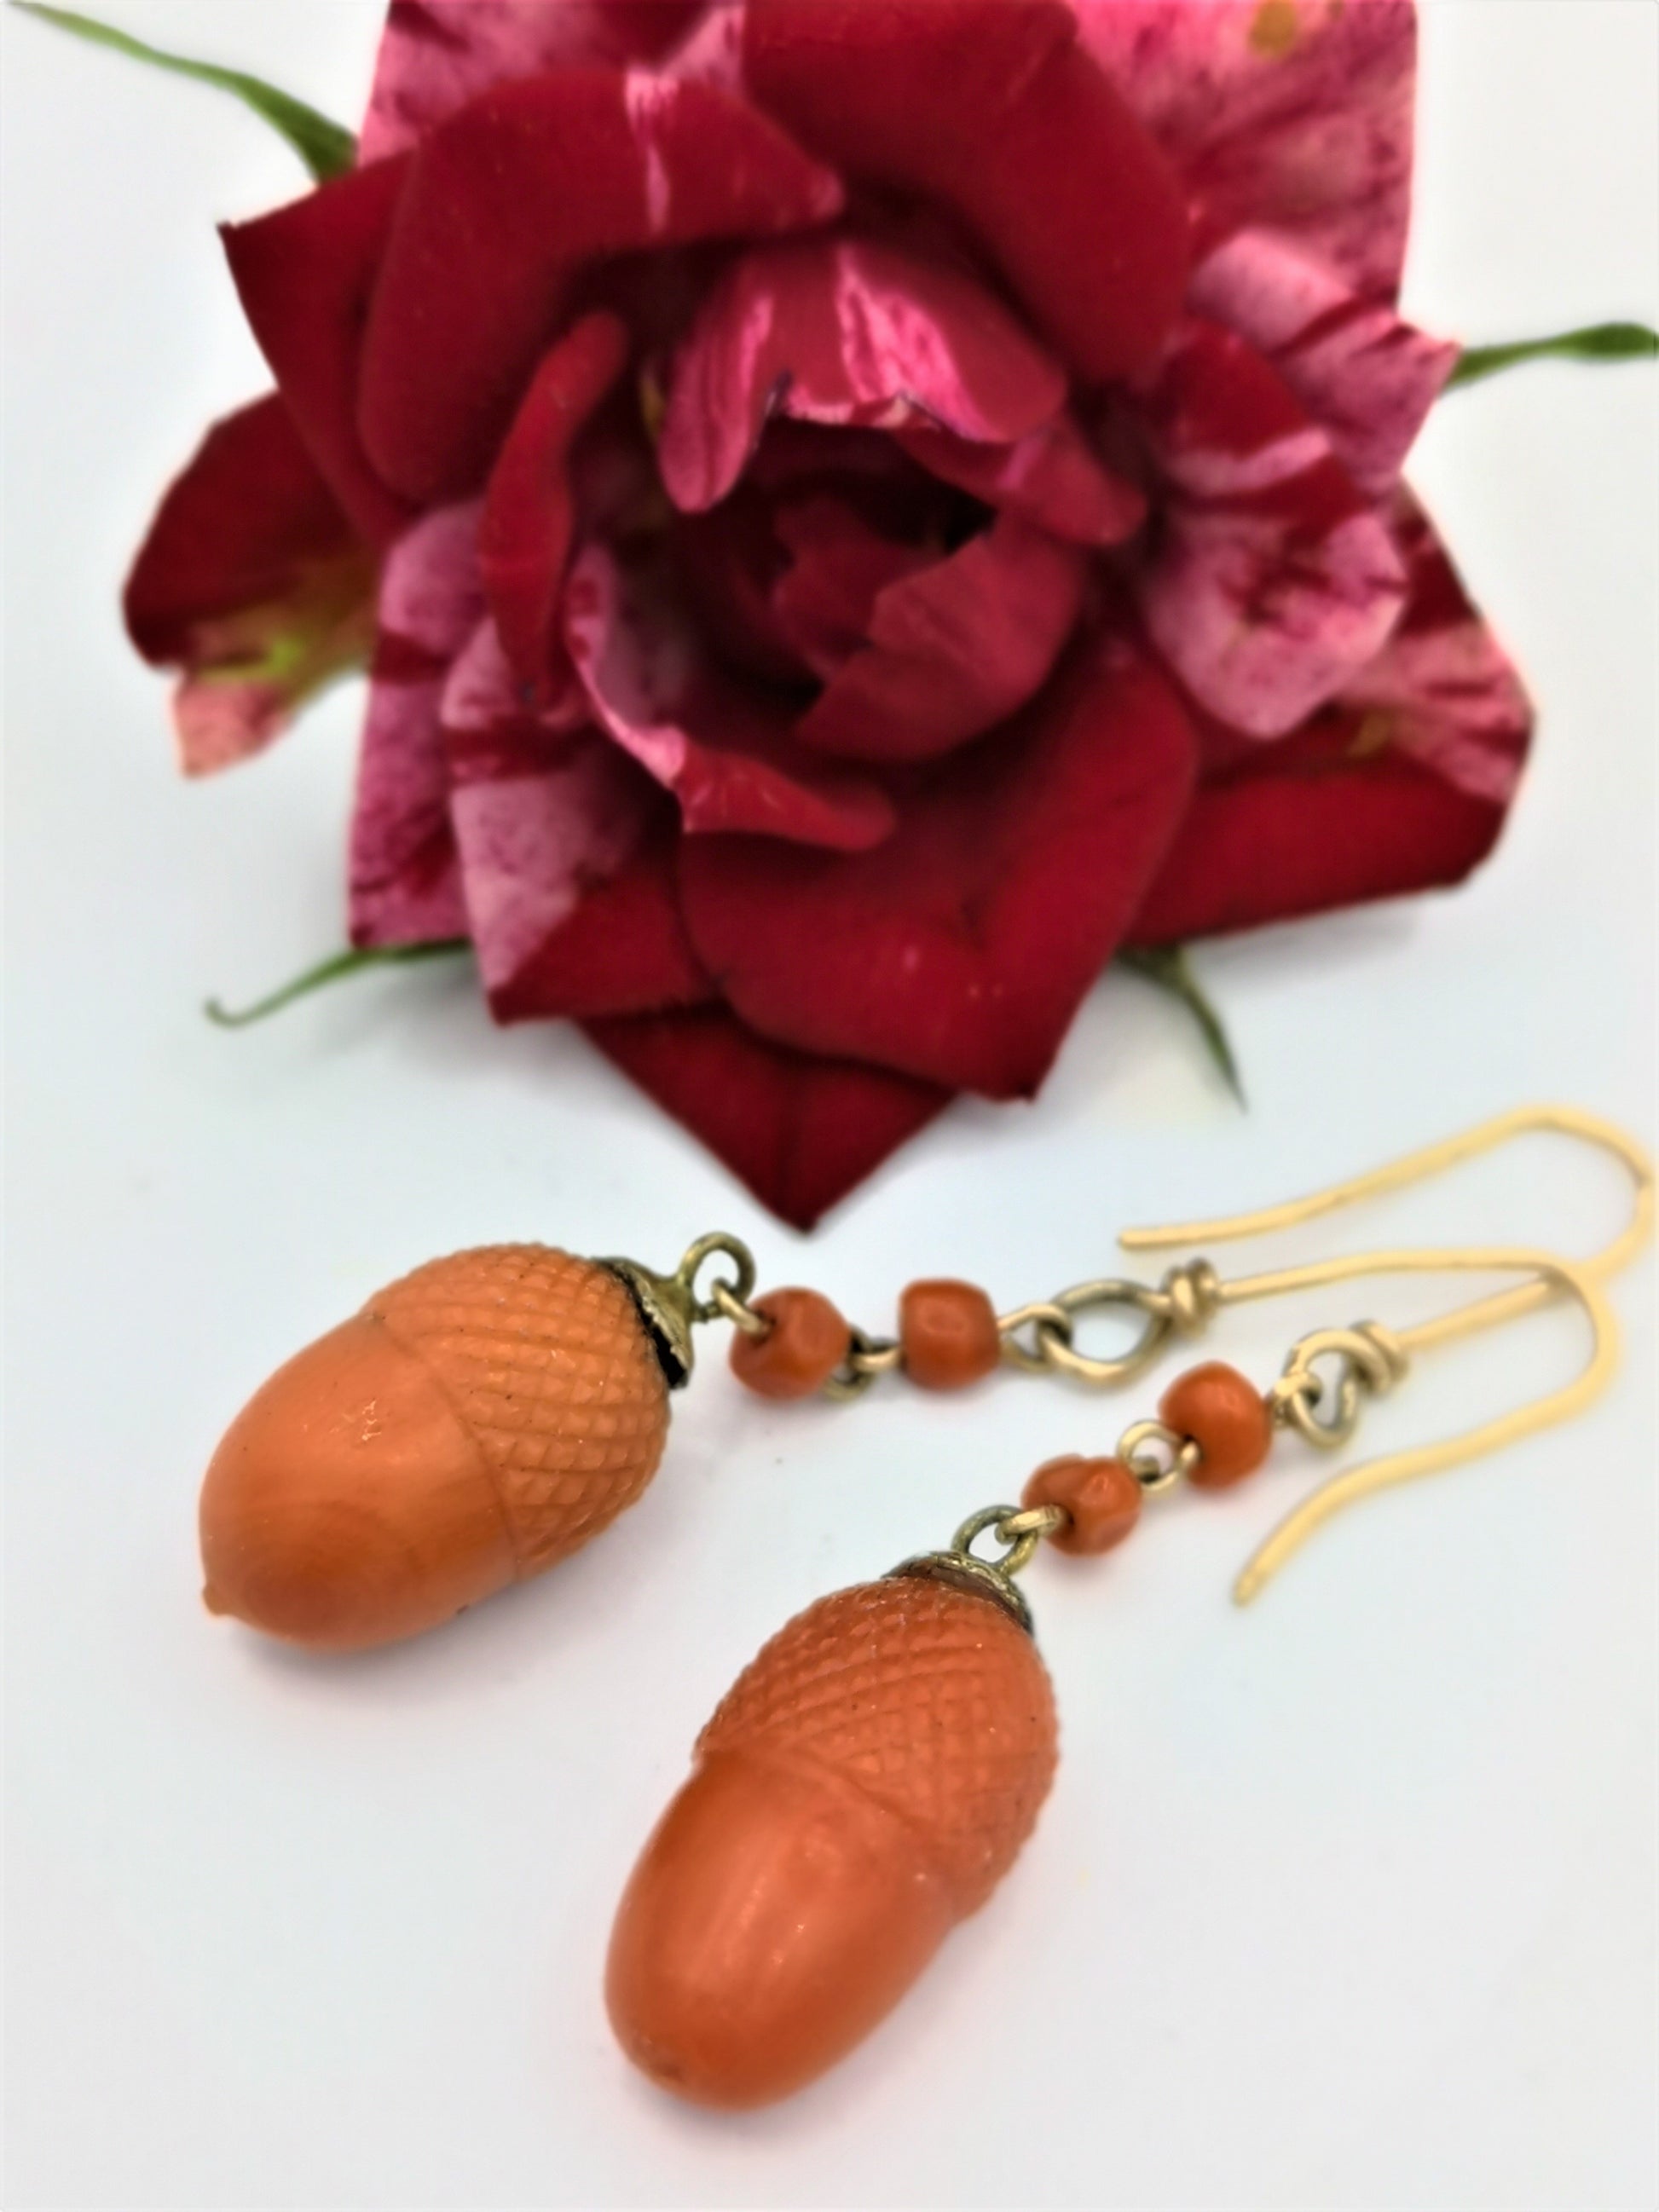 The Antique "Great oaks from little acorns grow" carved coral earrings - Medea's Mix